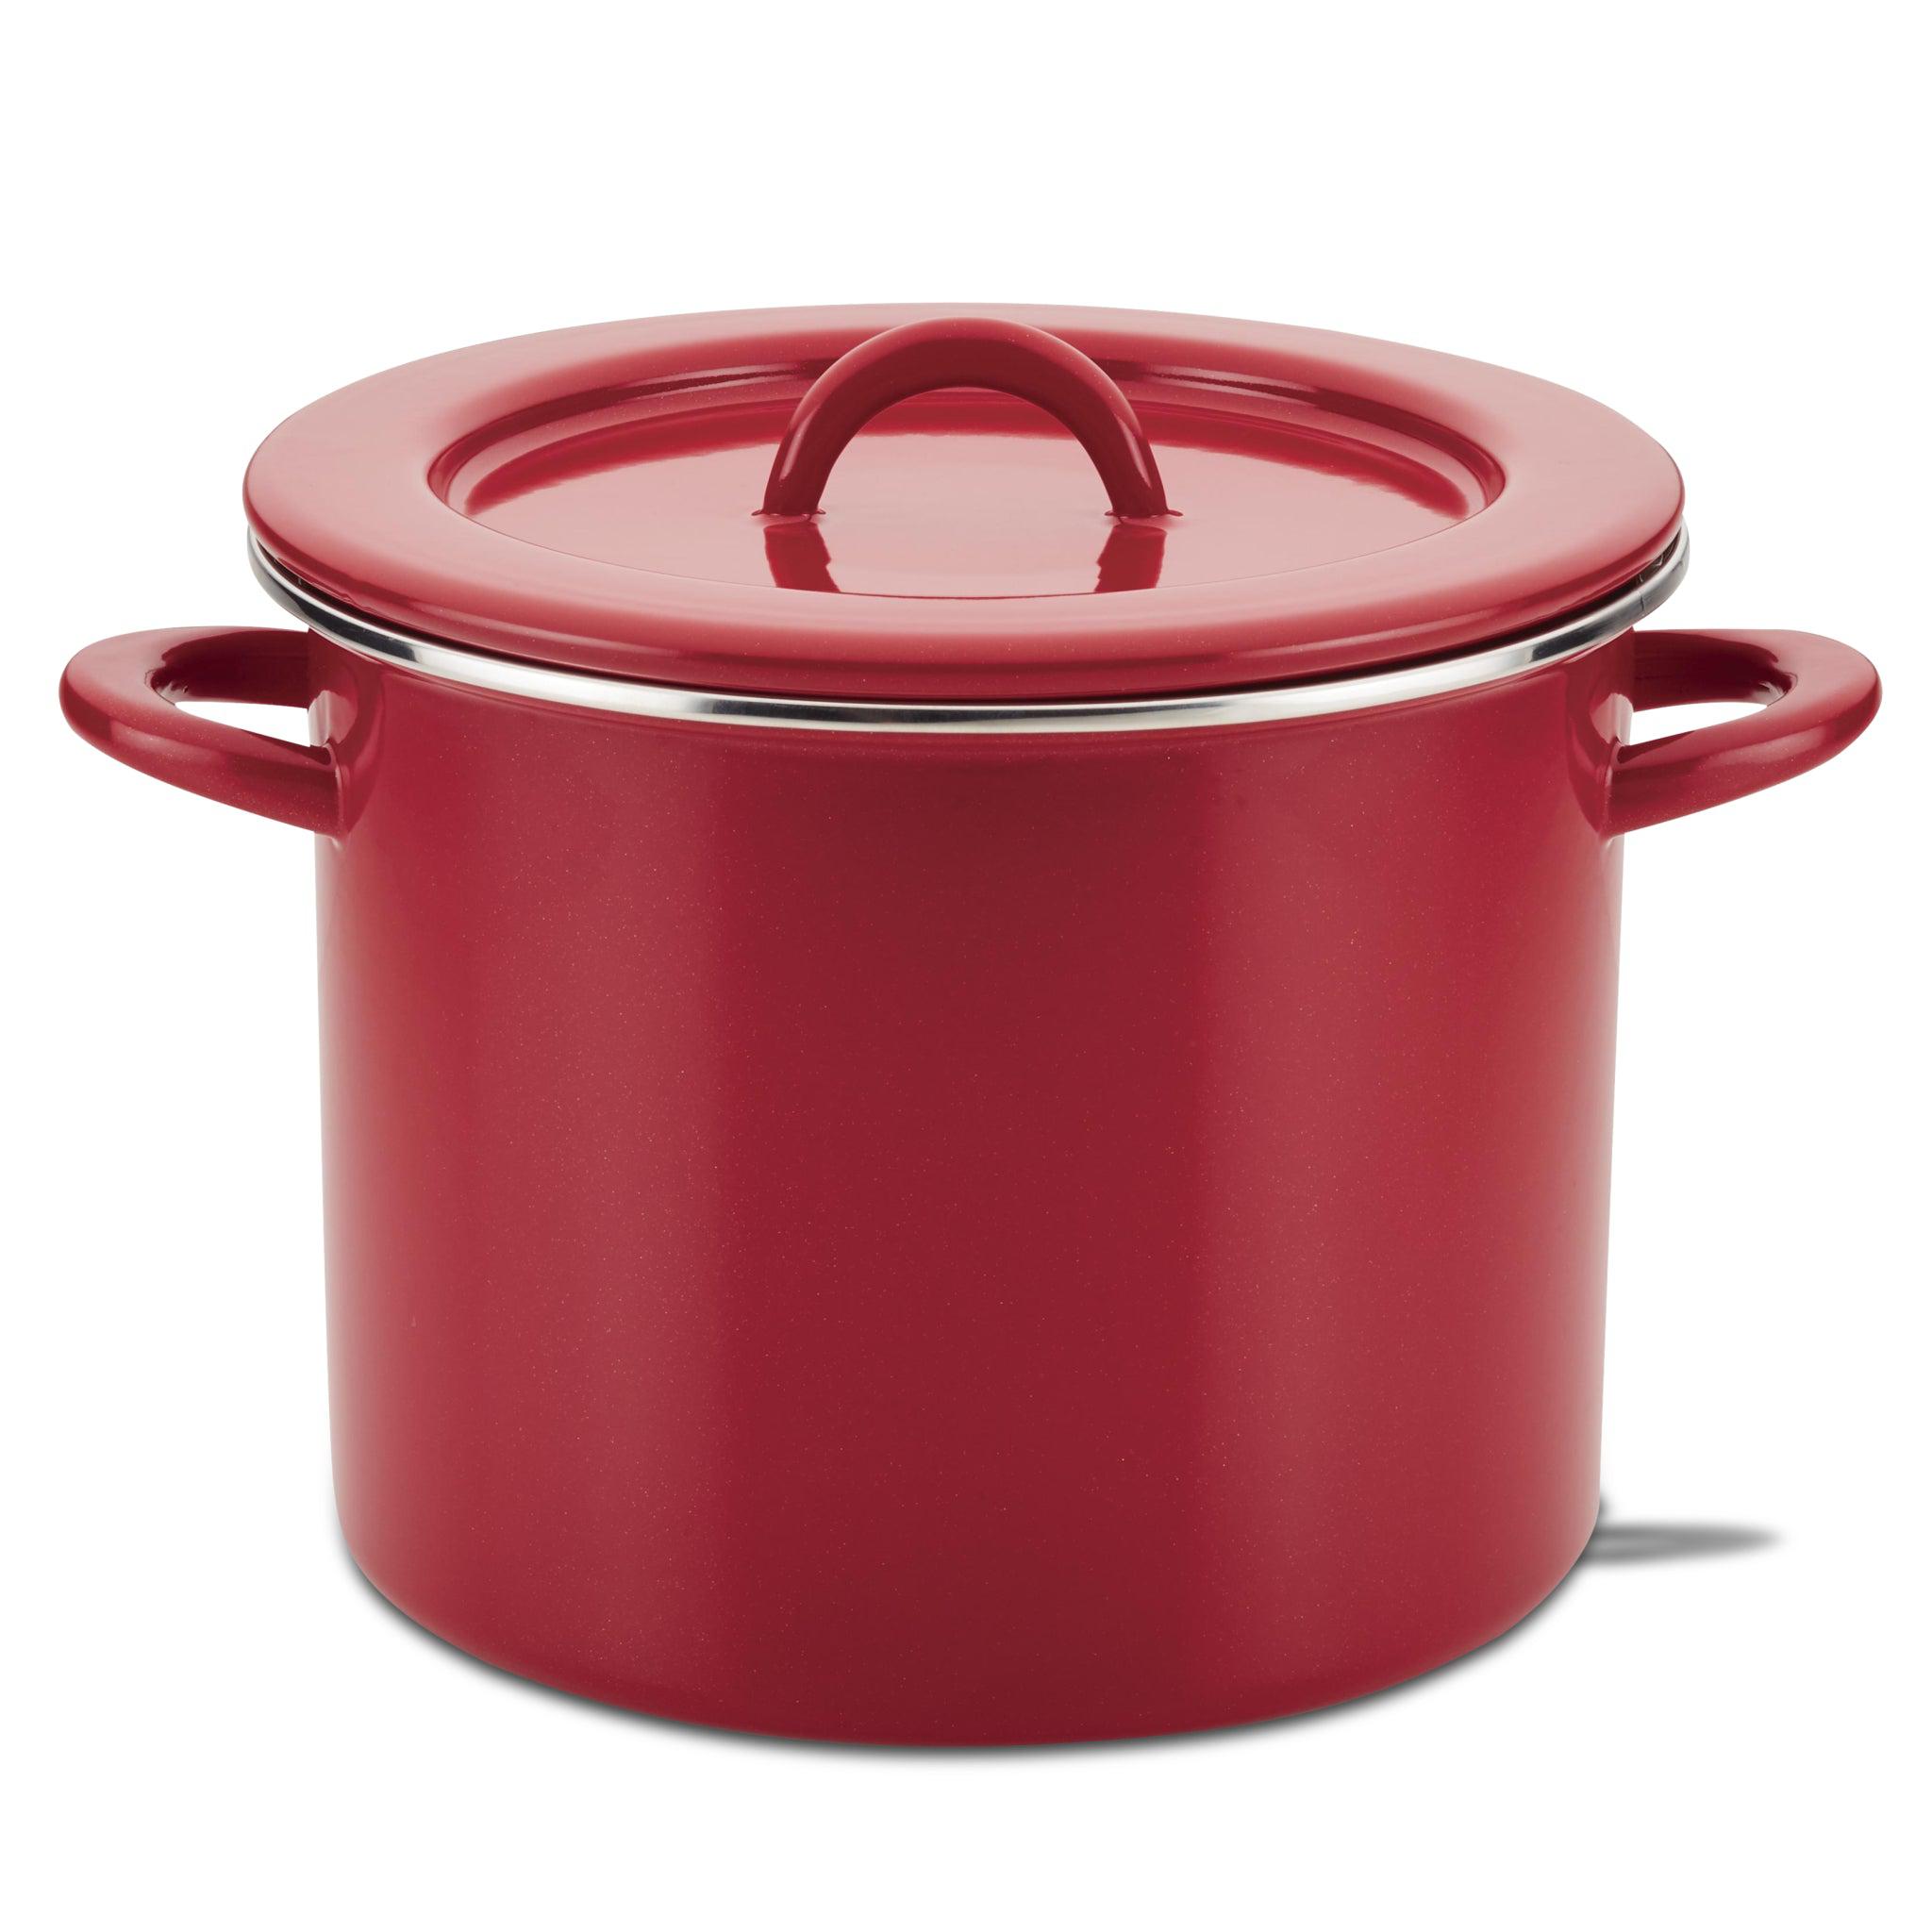 Cookware Create Delicious 12-Quart Covered Stockpot